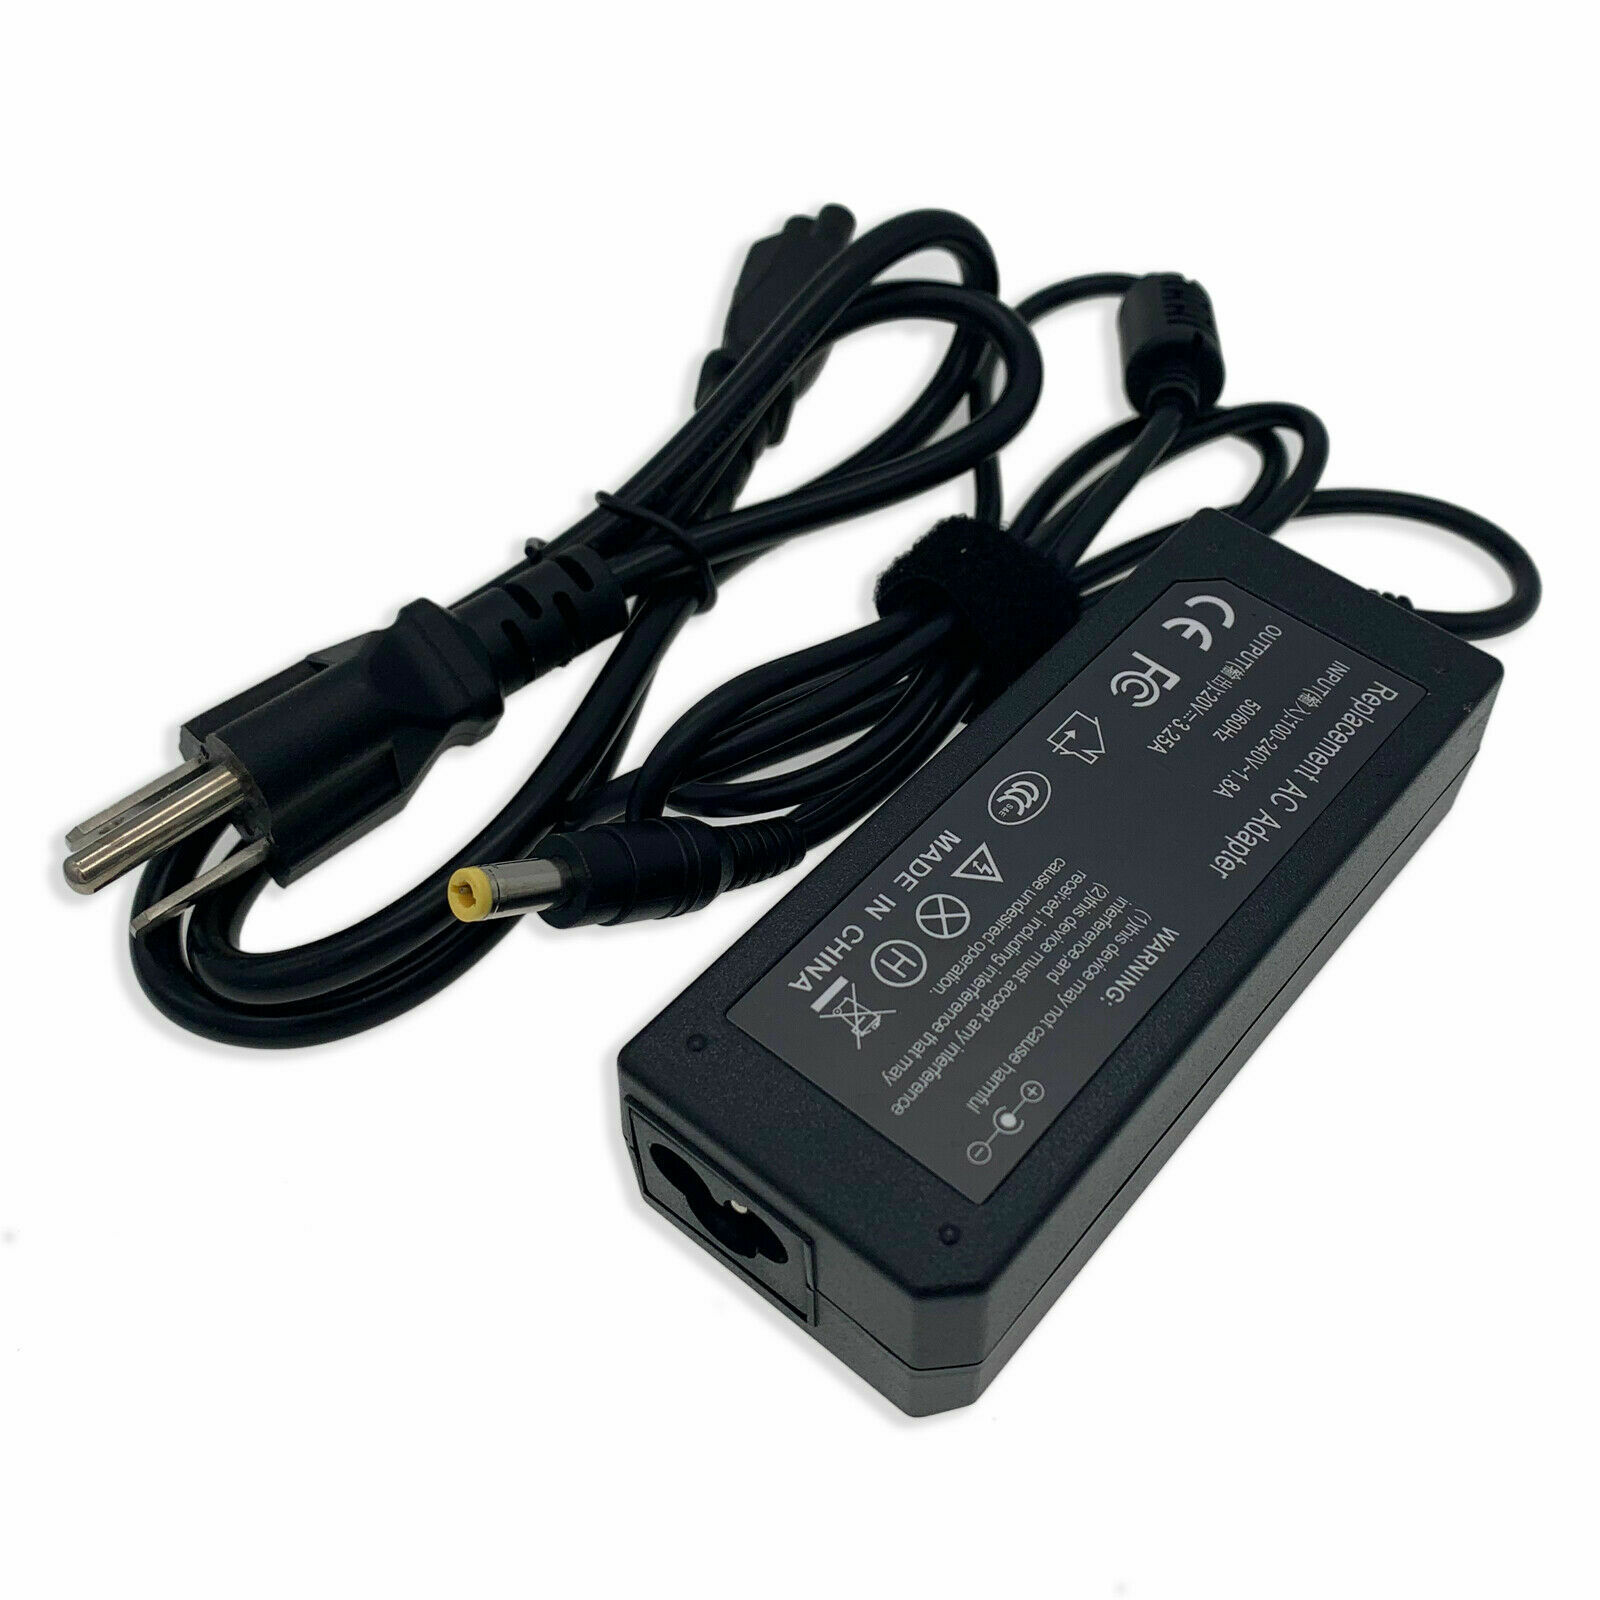 AC Adapter Charger for JBL Boombox Portable Wireless Speaker 20V Power Supply Compatible Brand: Universal Type: Pow - Click Image to Close